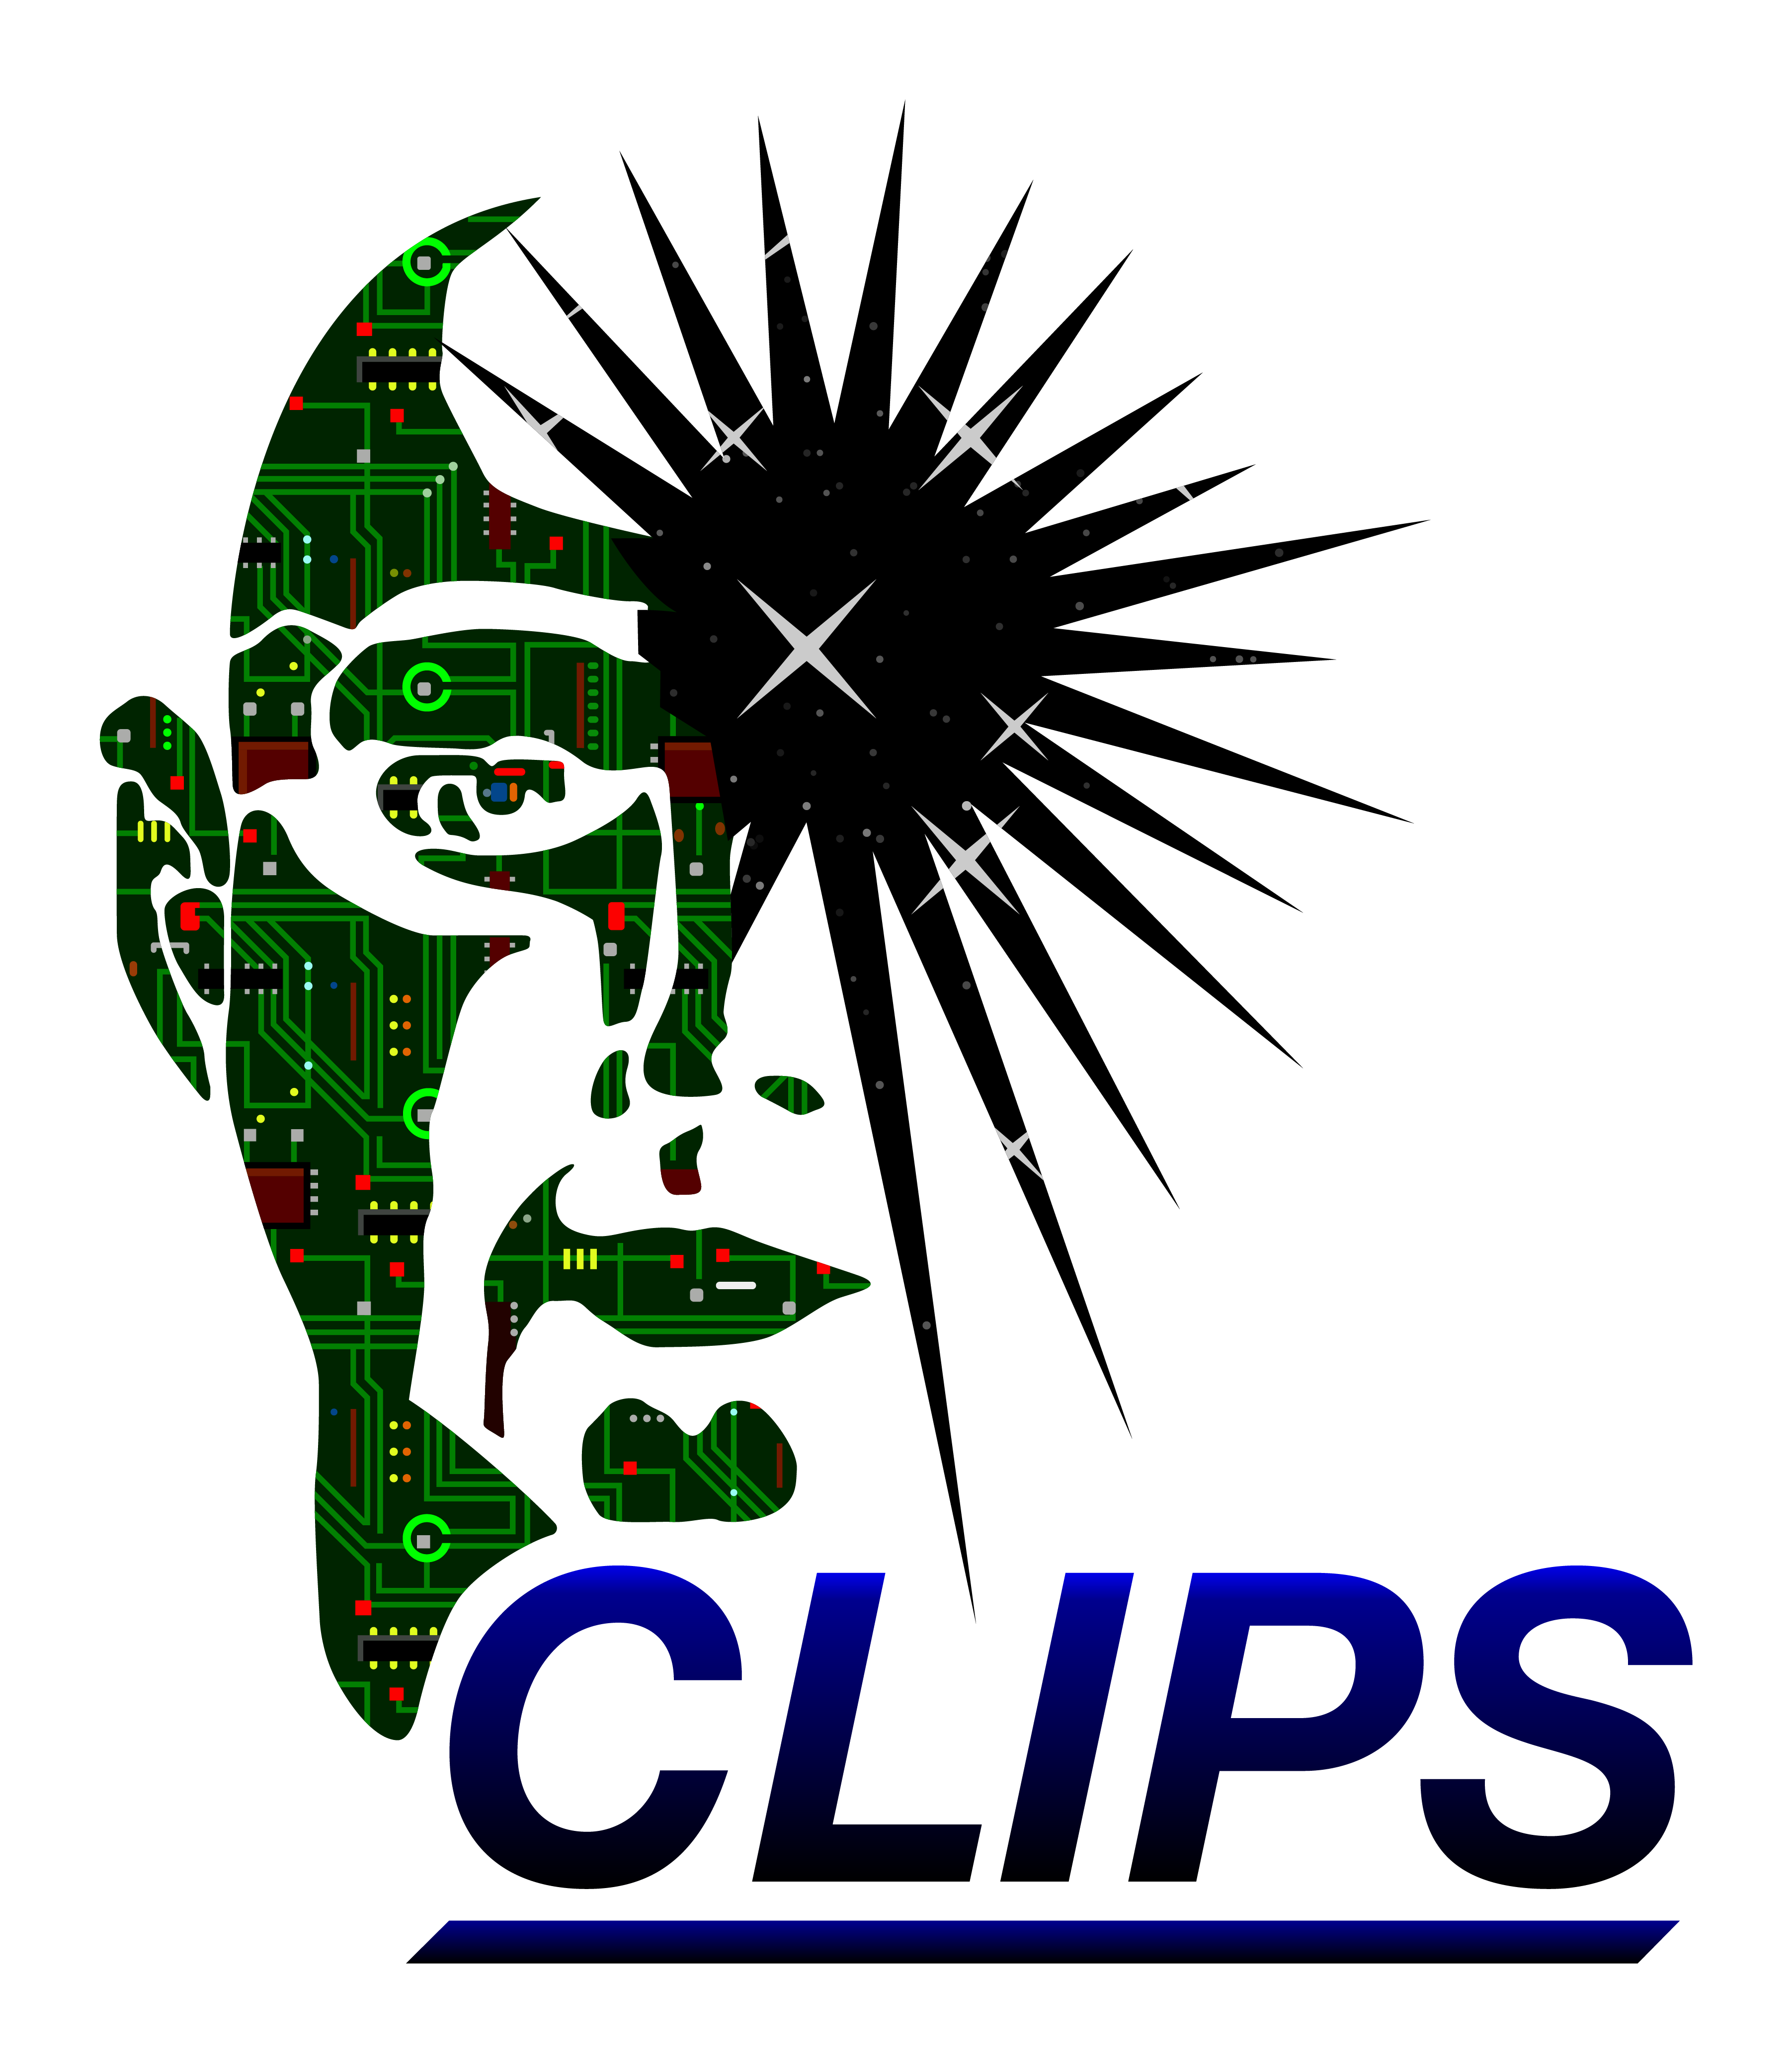 CLIPS: A Tool for Building Expert Systems